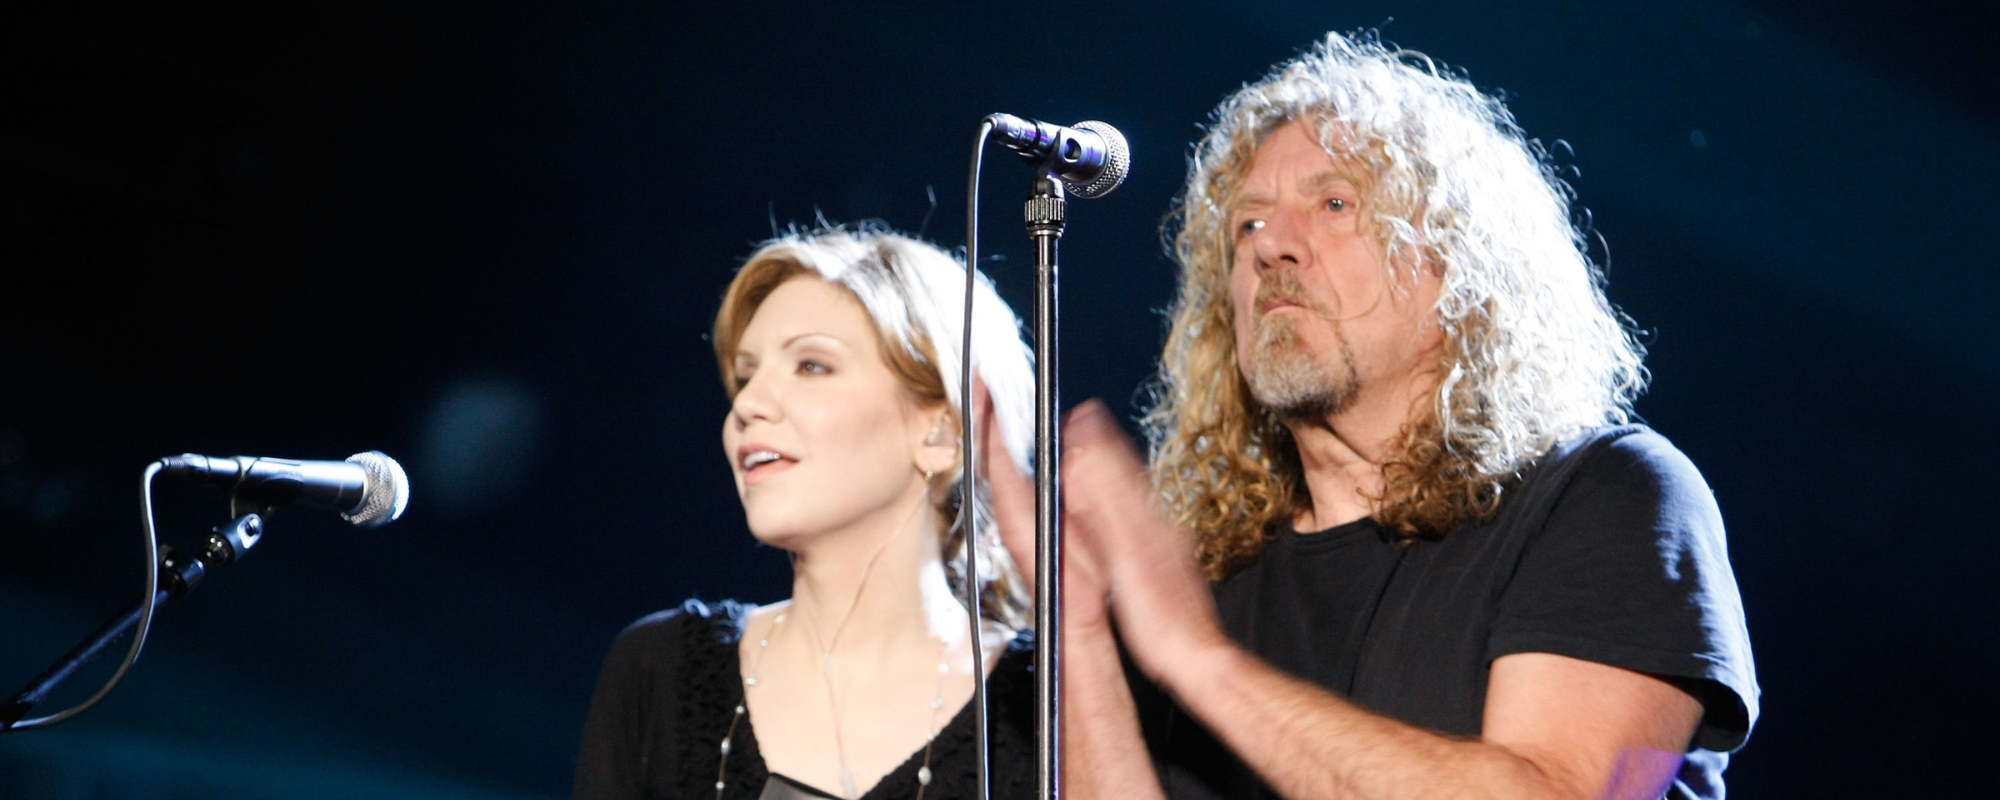 Robert Plant Is in Too Deep While Alison Krauss Just Soars Above It All: The Meaning Behind “Killing the Blues”